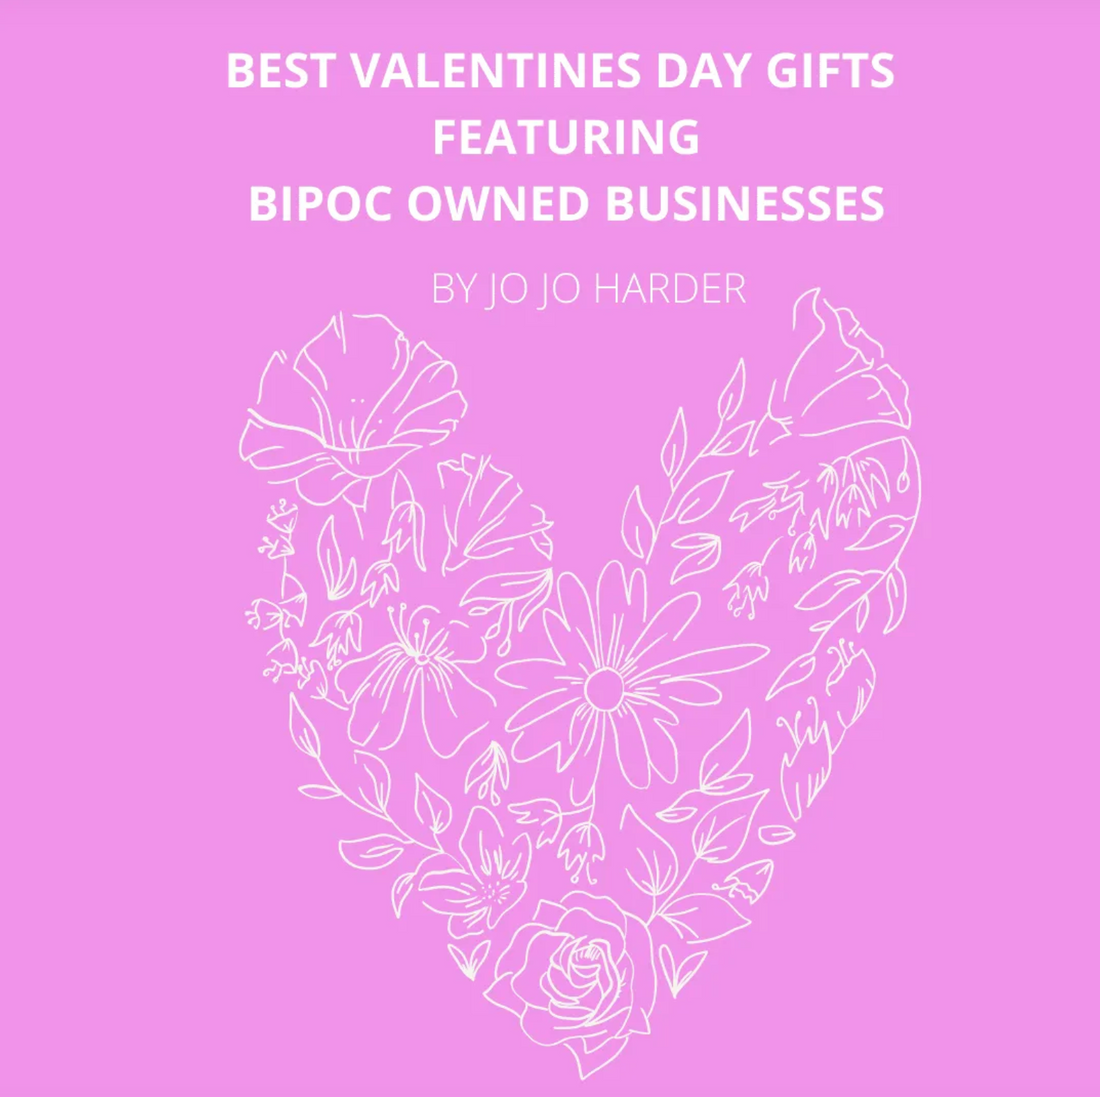 Best Valentines Day Gifts Featuring BIPOC Owned Businesses